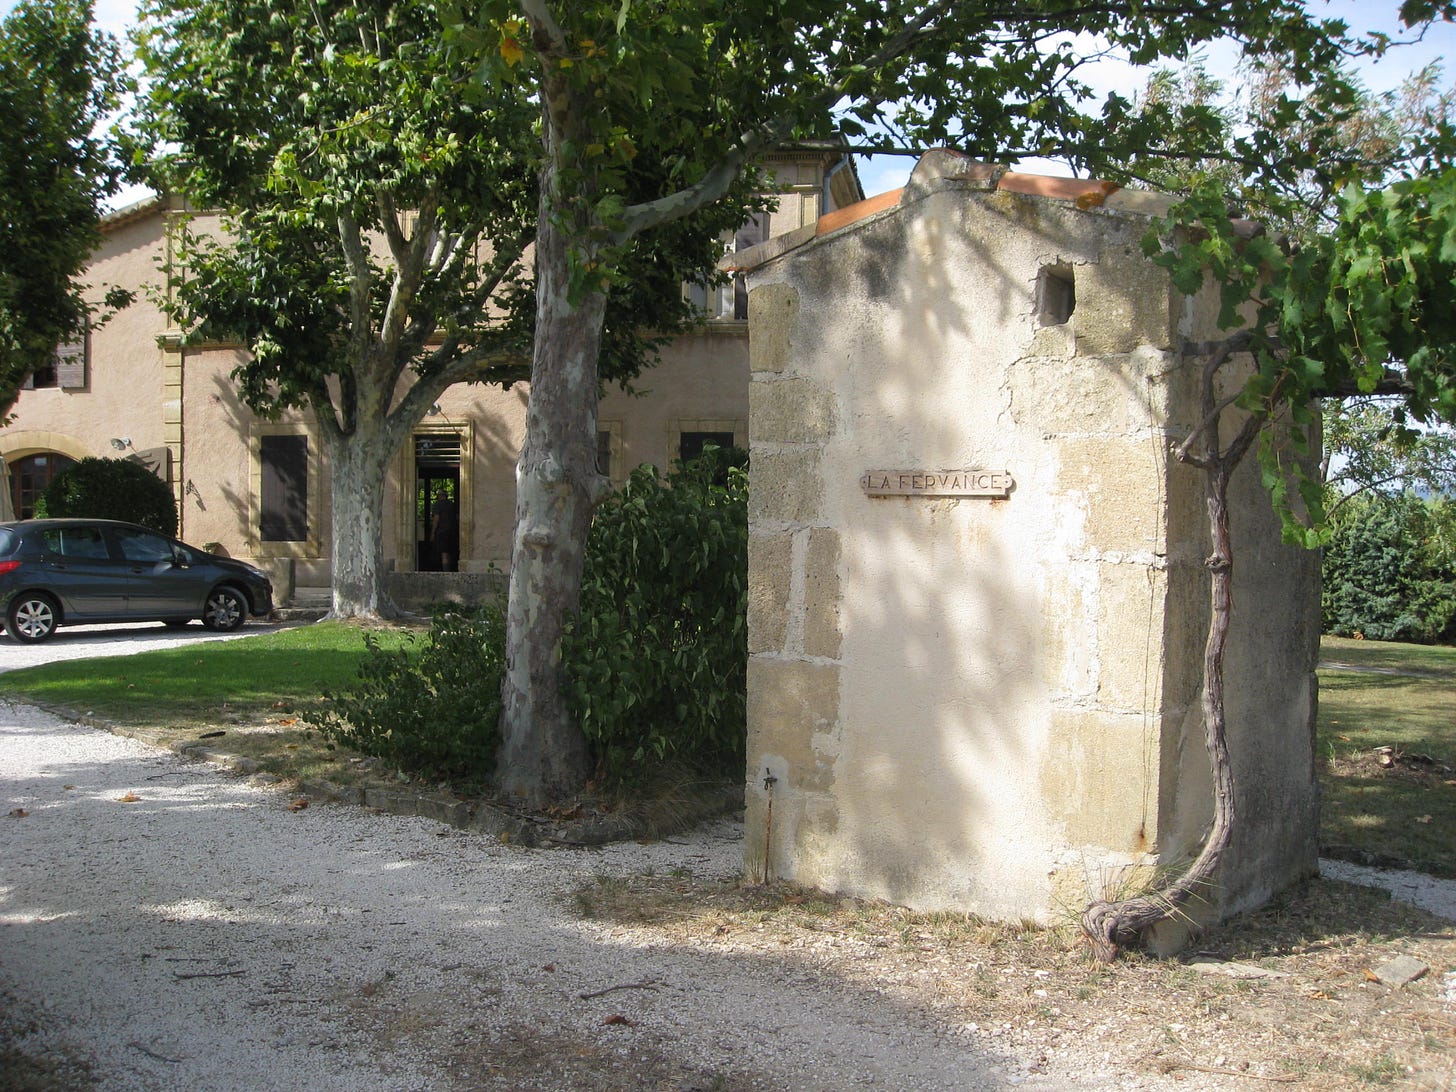 The Nathan family sabbatical year home in Rognes, France.